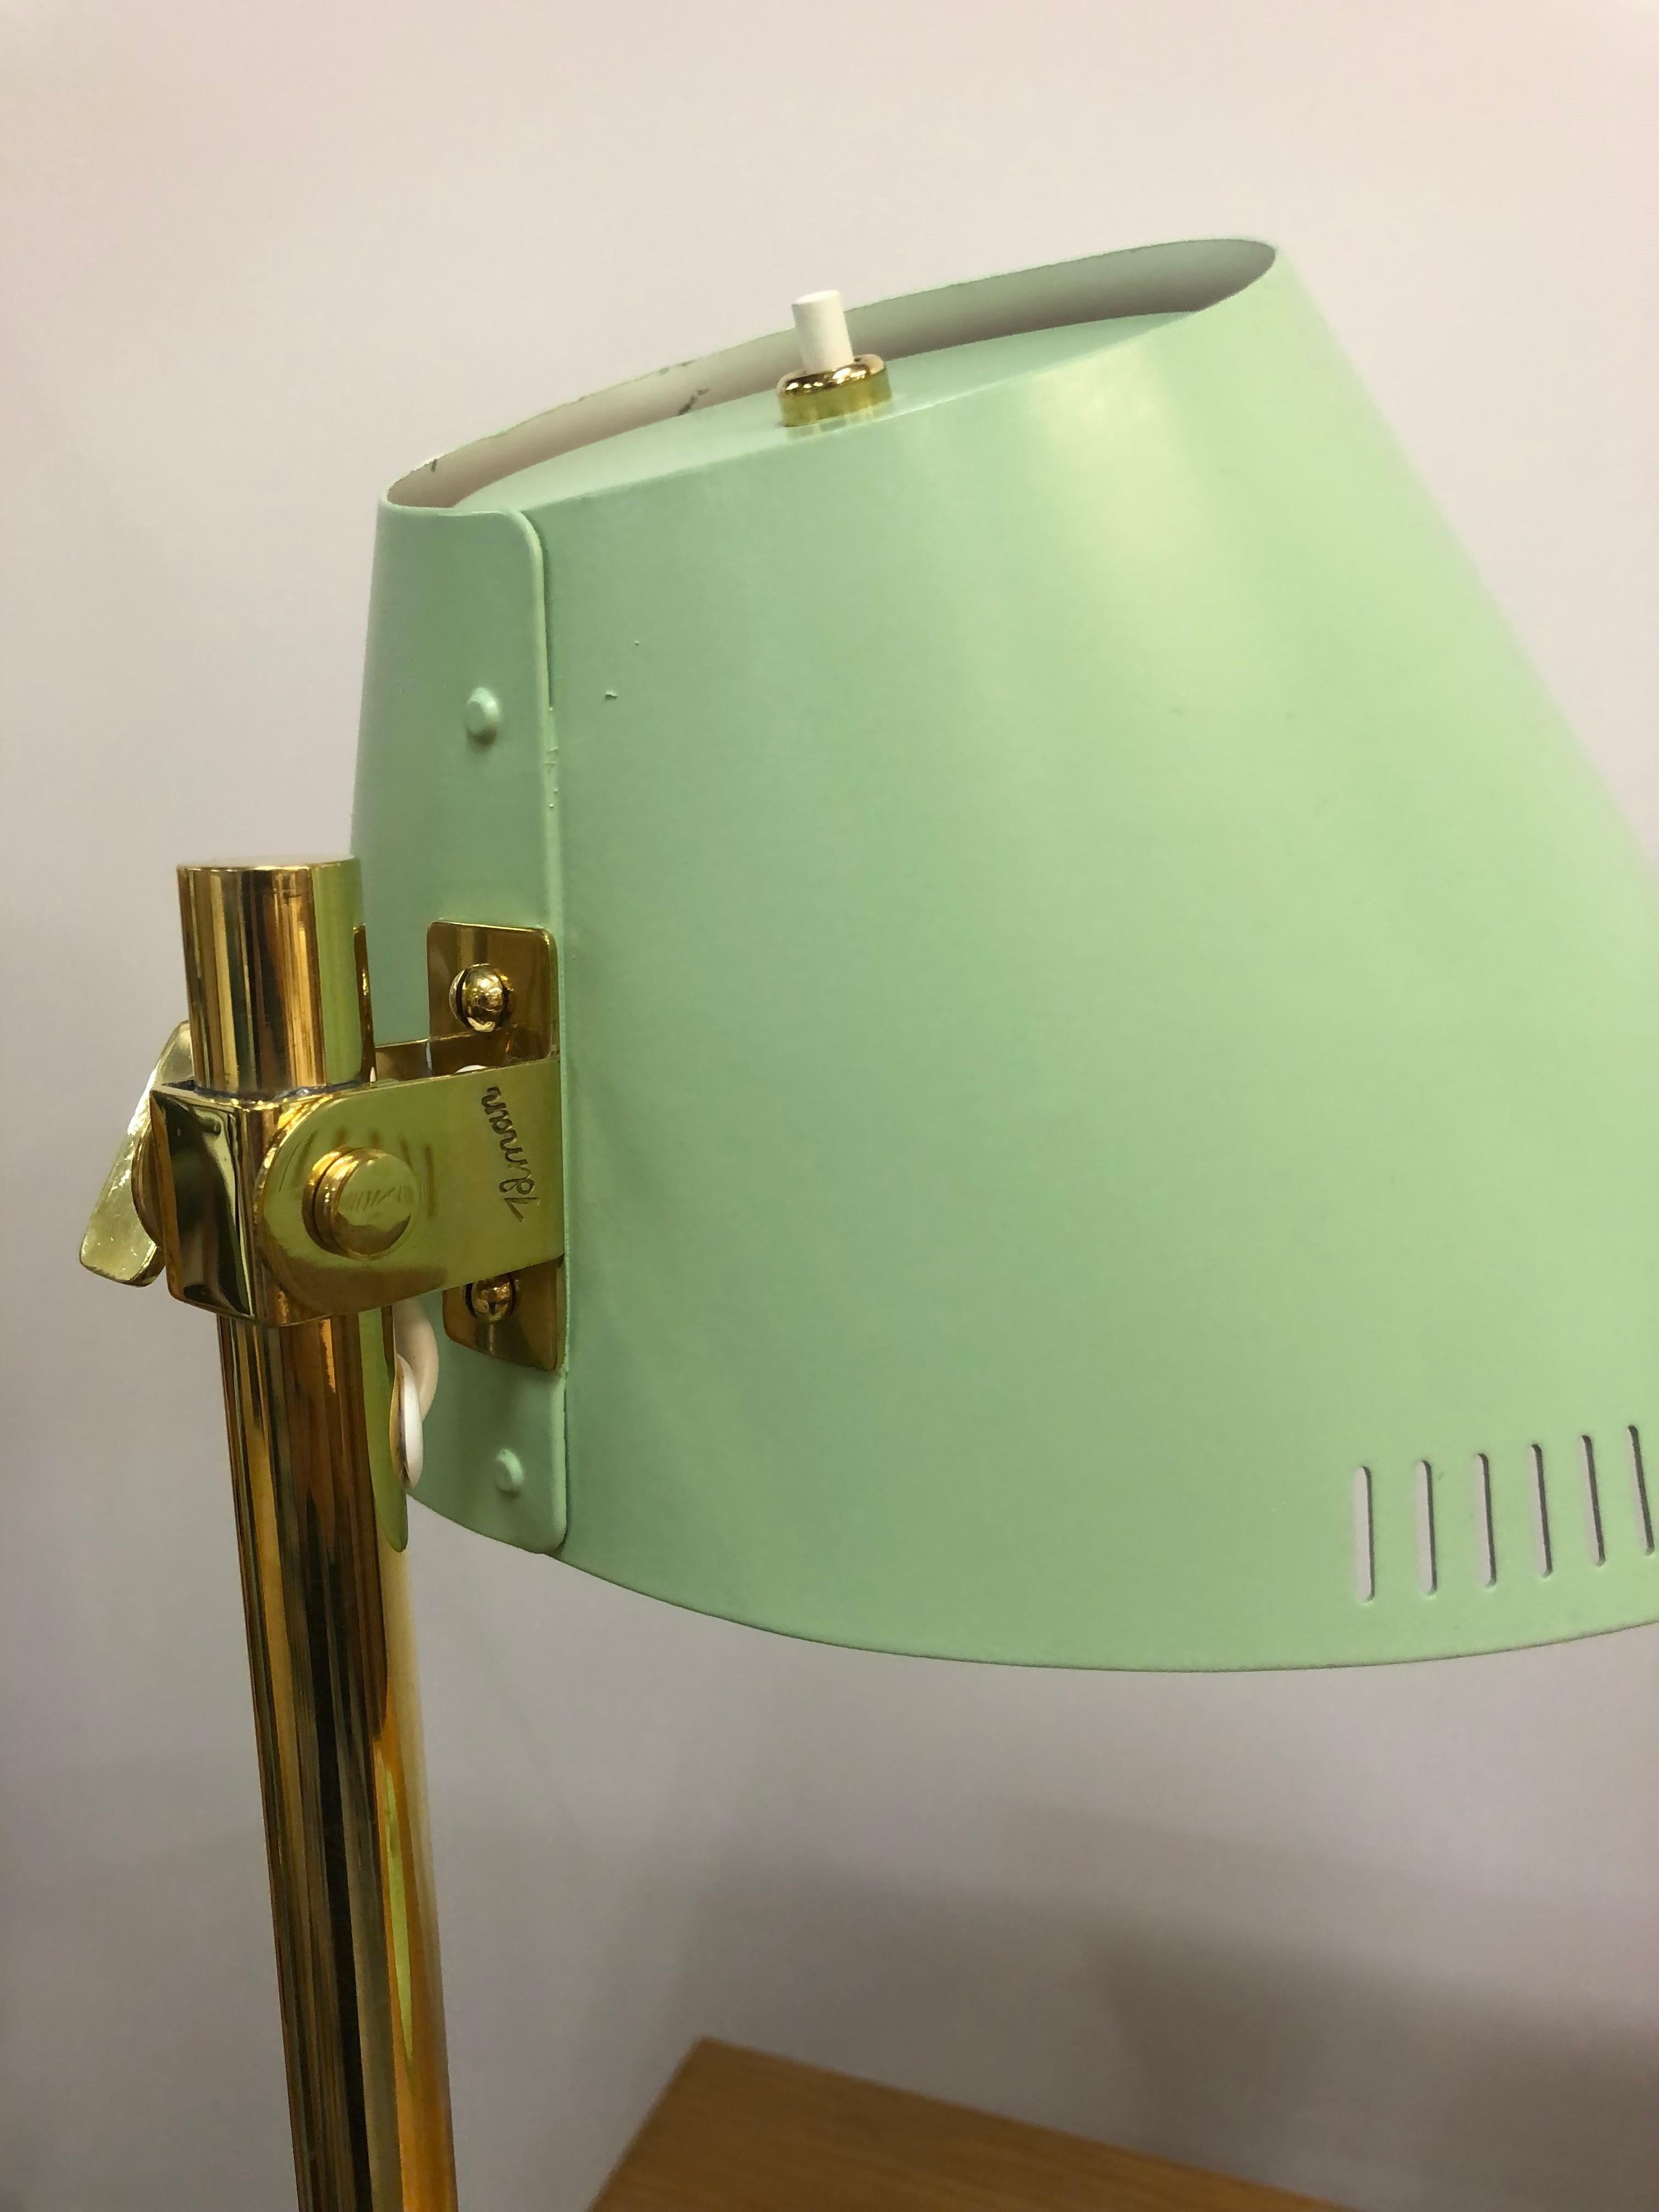 Finnish Paavo Tynell Pair of Table Lamps Model 9227 In Teal/Light Green, Taito/Idman